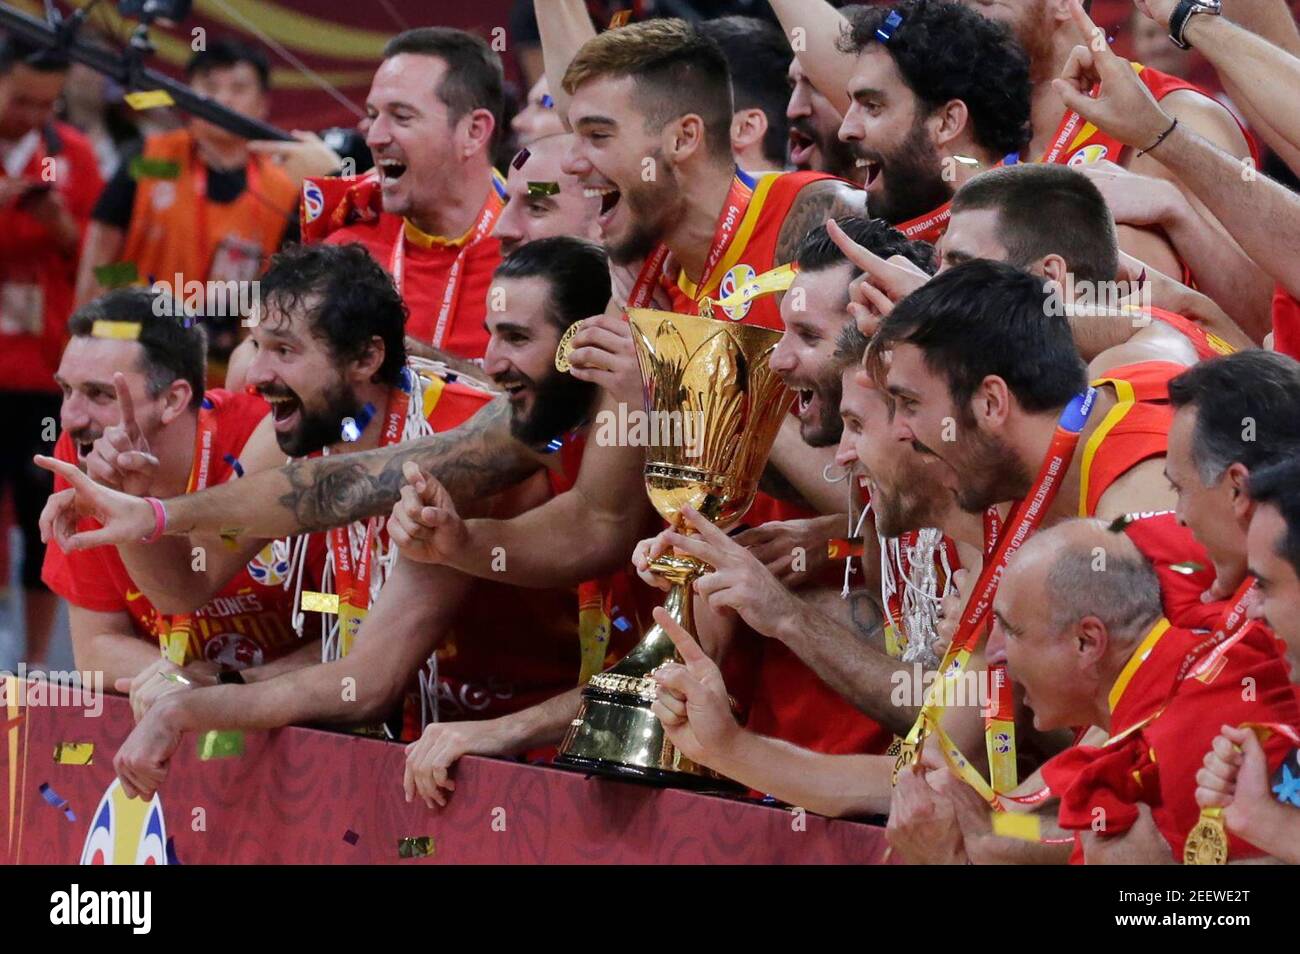 Basketball - FIBA World Cup - Final - Argentina v Spain - Wukesong Sport Arena, Beijing, China - September 15, 2019   Spain's players celebrate with the trophy after winning the FIBA World Cup REUTERS/Jason Lee Stock Photo